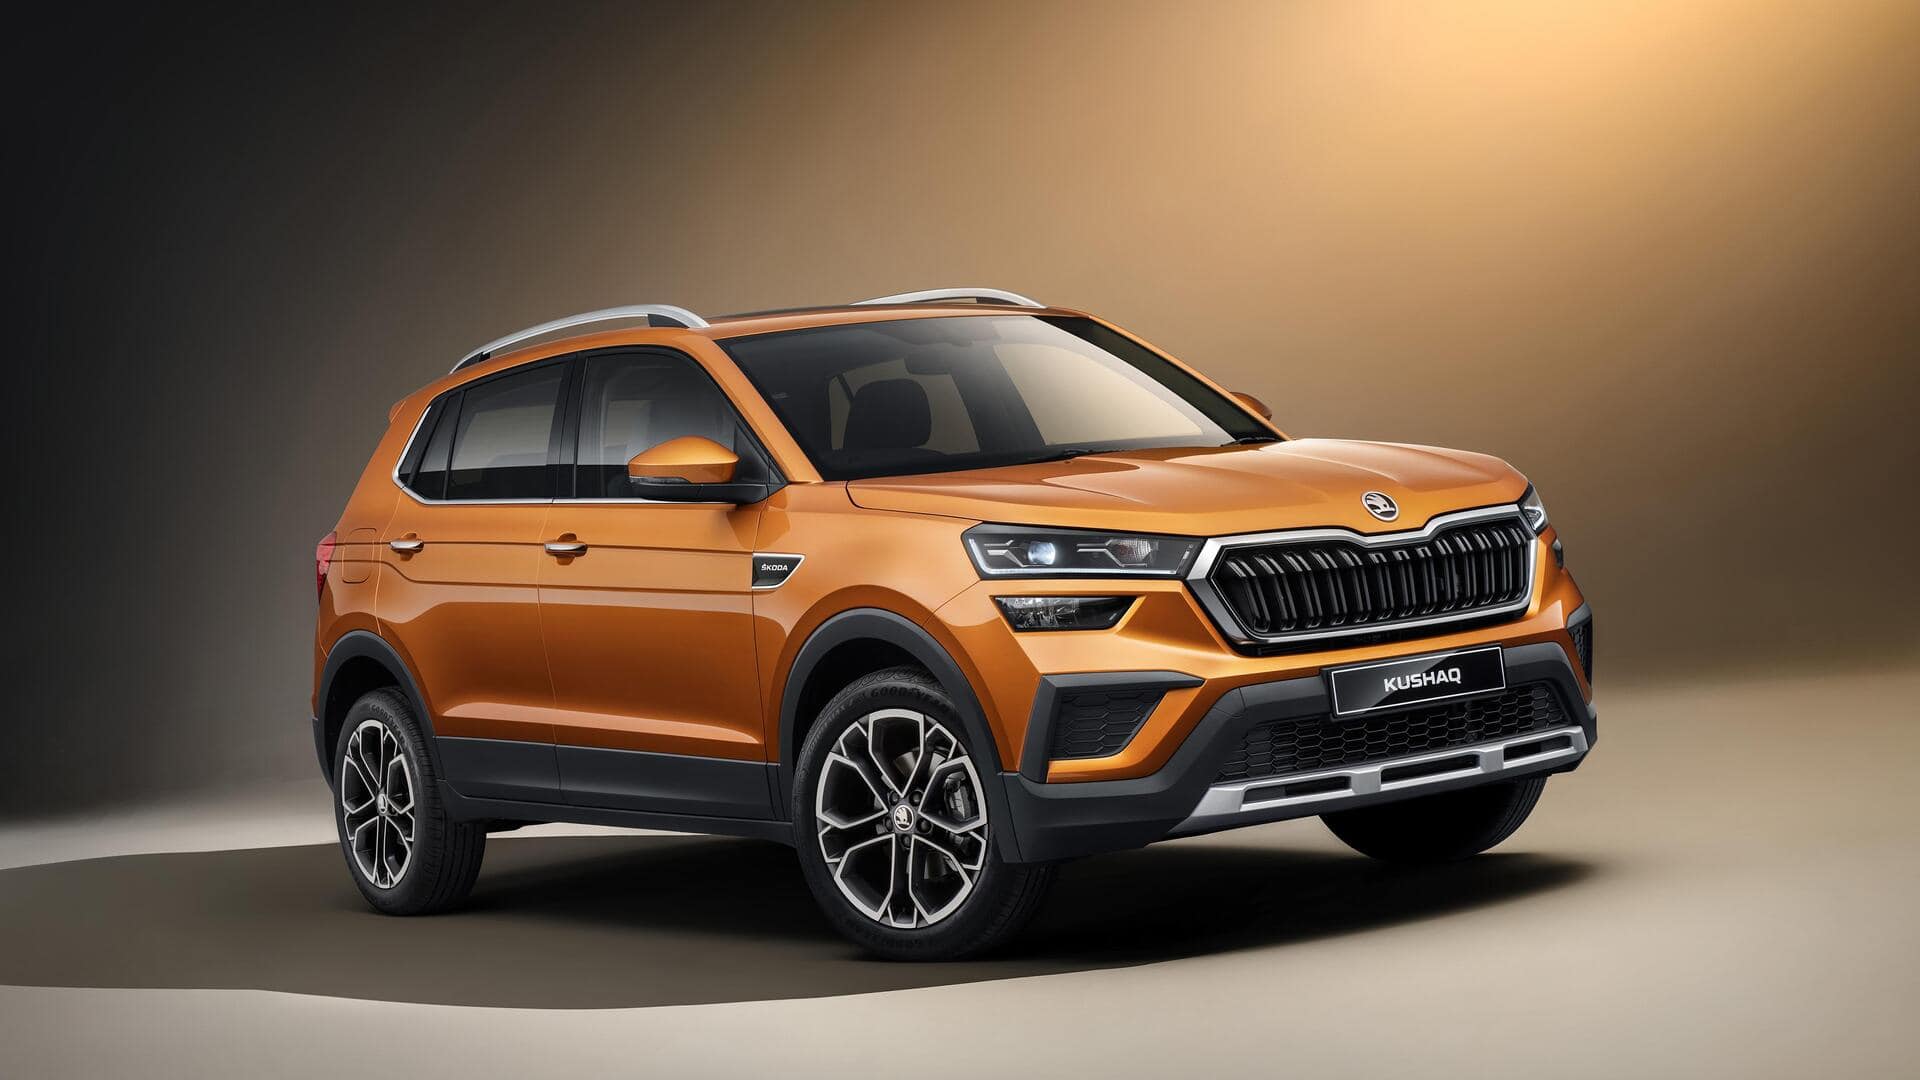 SKODA shortlists names for new subcompact SUV: Check them here